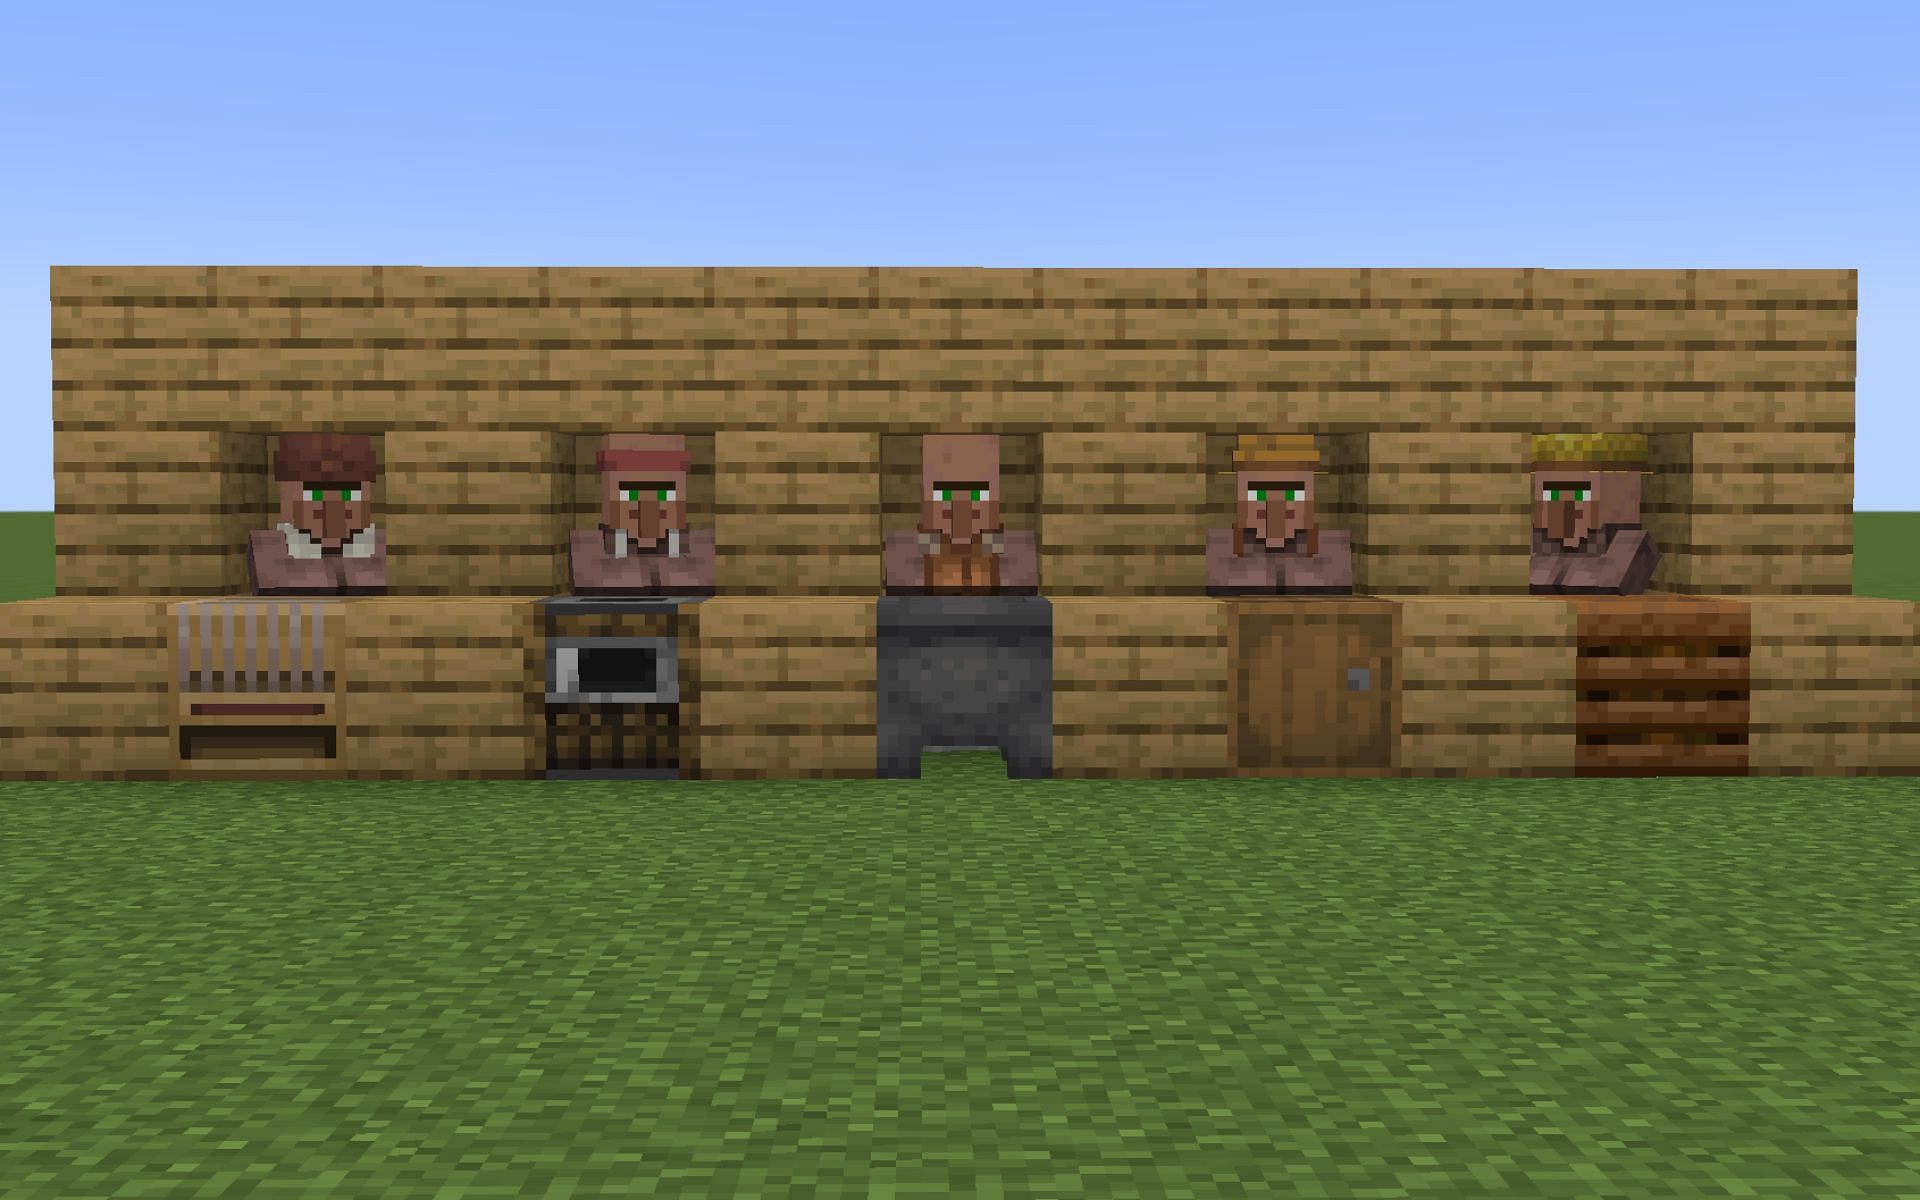 Certain villagers can sell and buy items in Minecraft (Image via Mojang)